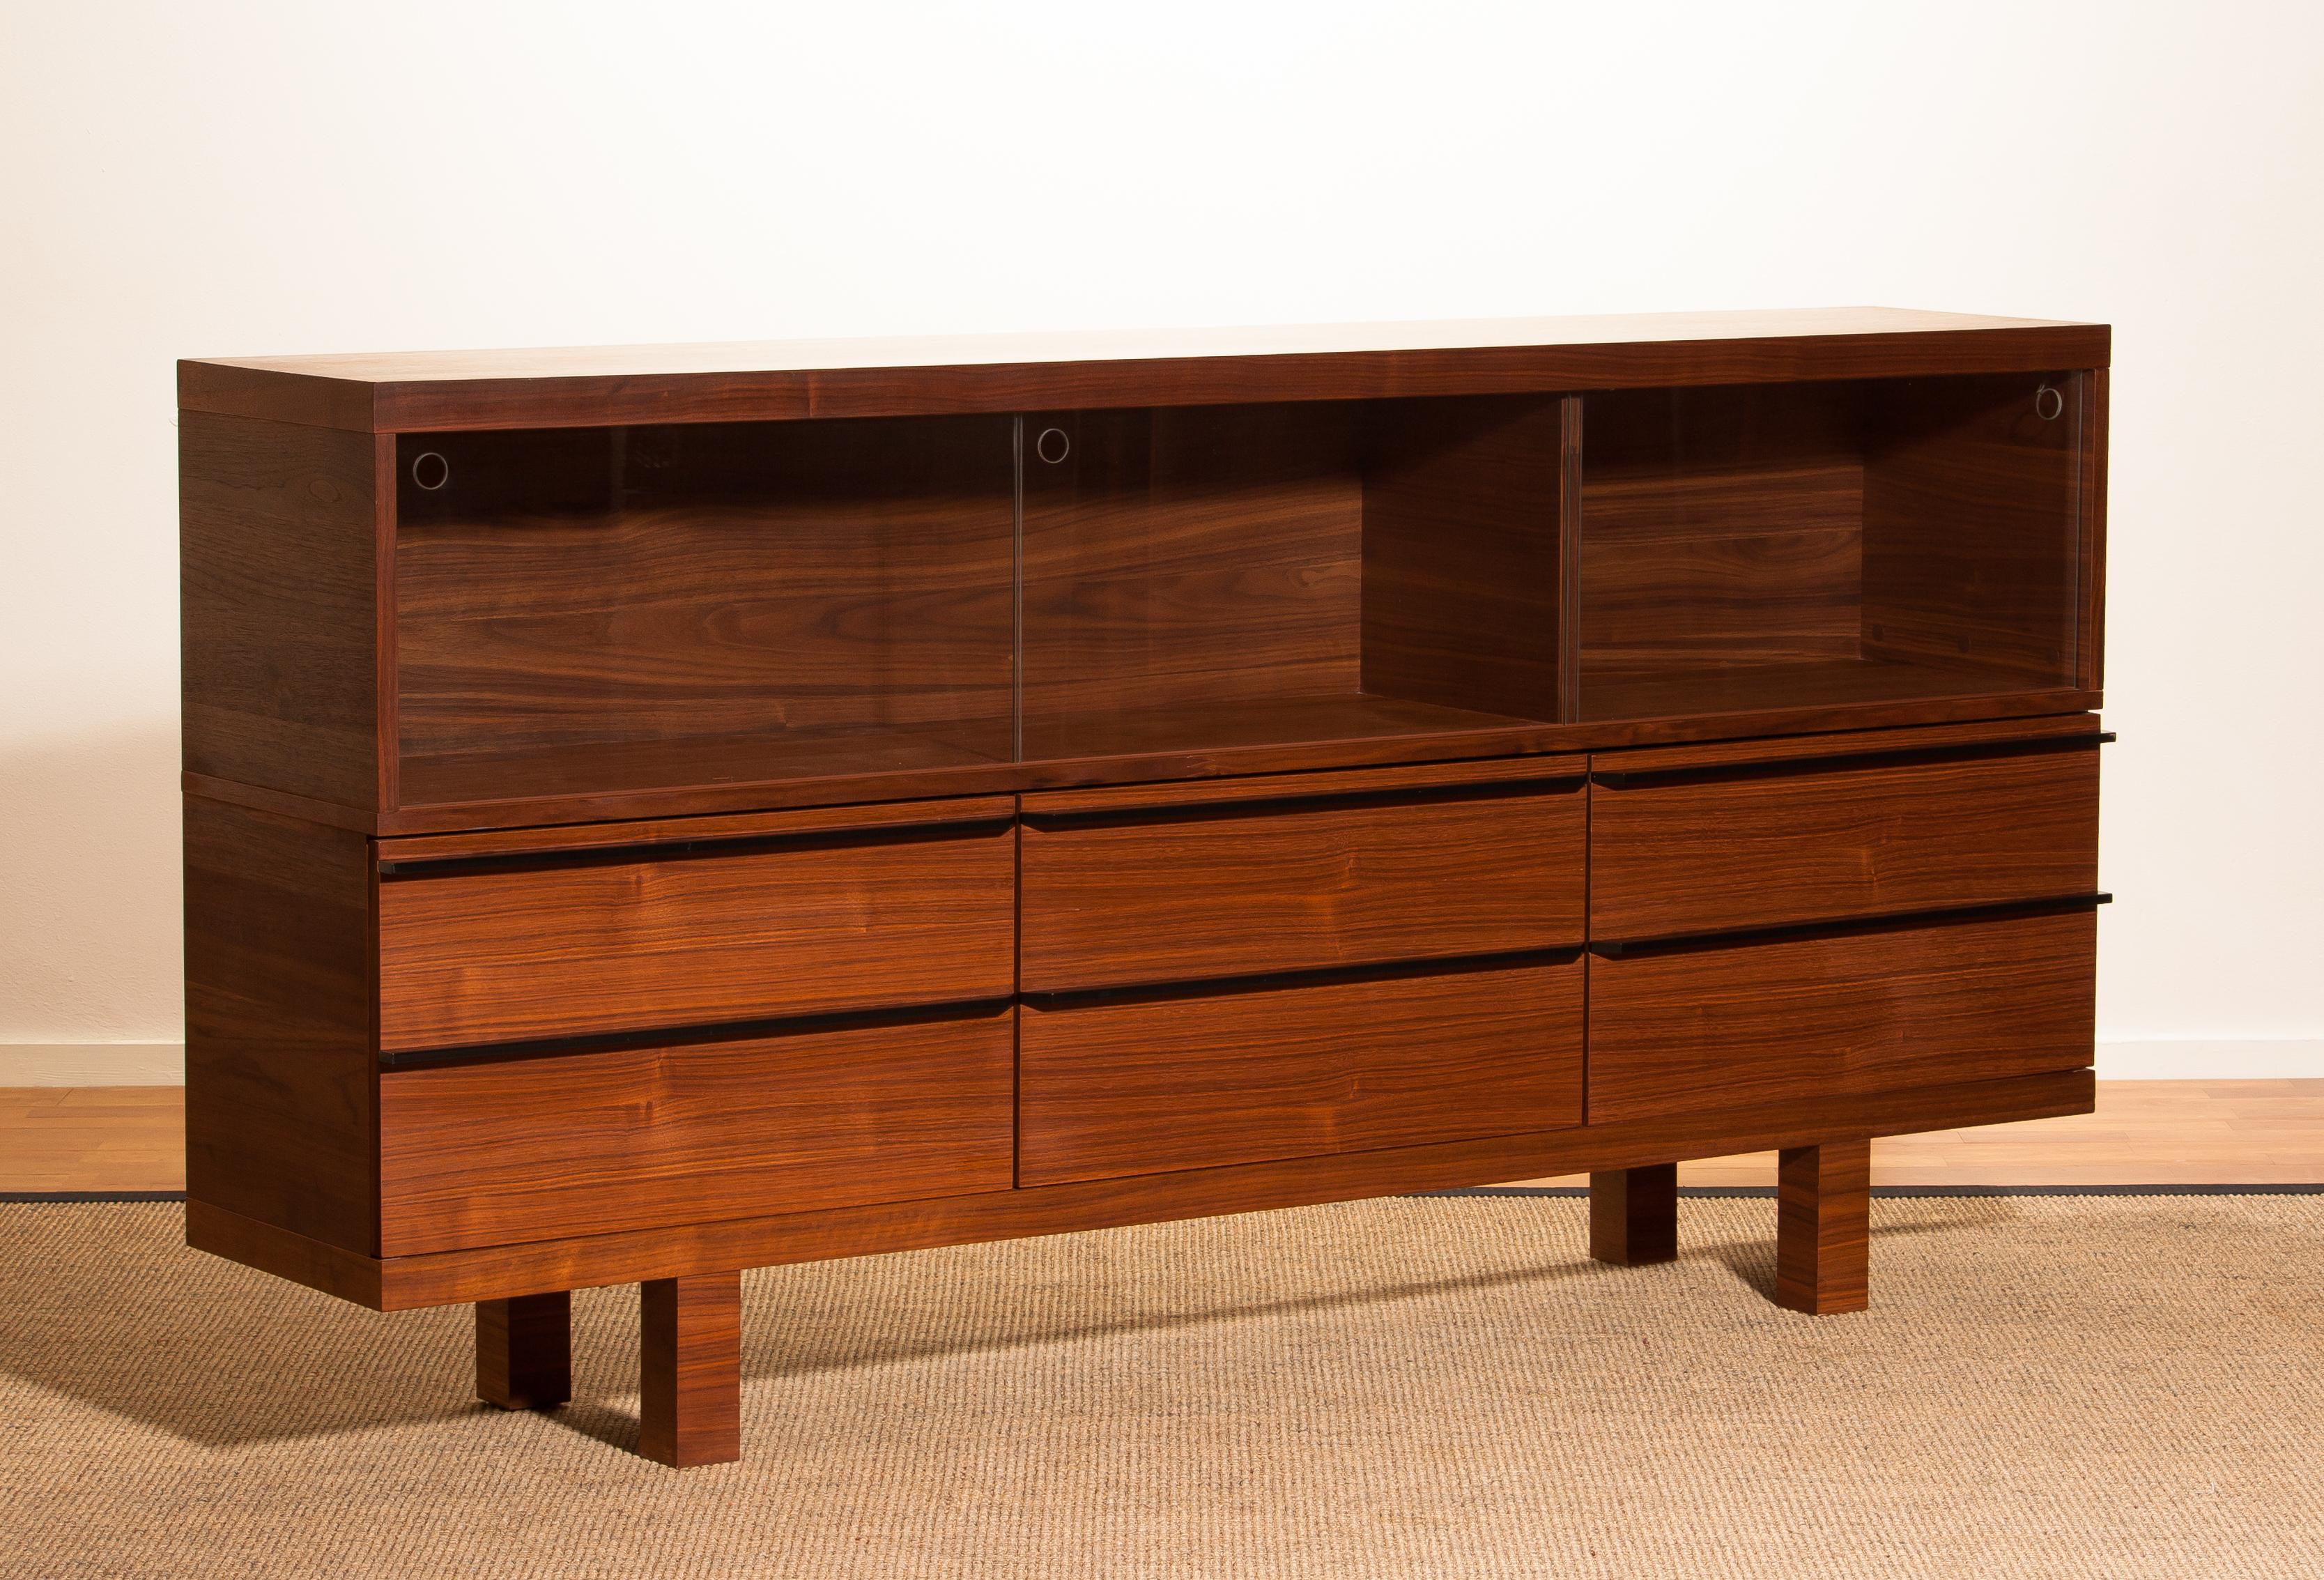 Beautiful sideboard made of walnut veneer.
Three glass sliding doors (vitrine top) and three doors with a six drawers optic.
Period 1980s.
The dimensions are W 180, H 90, D 35.
The height of the glass vitrine is 30 cm.